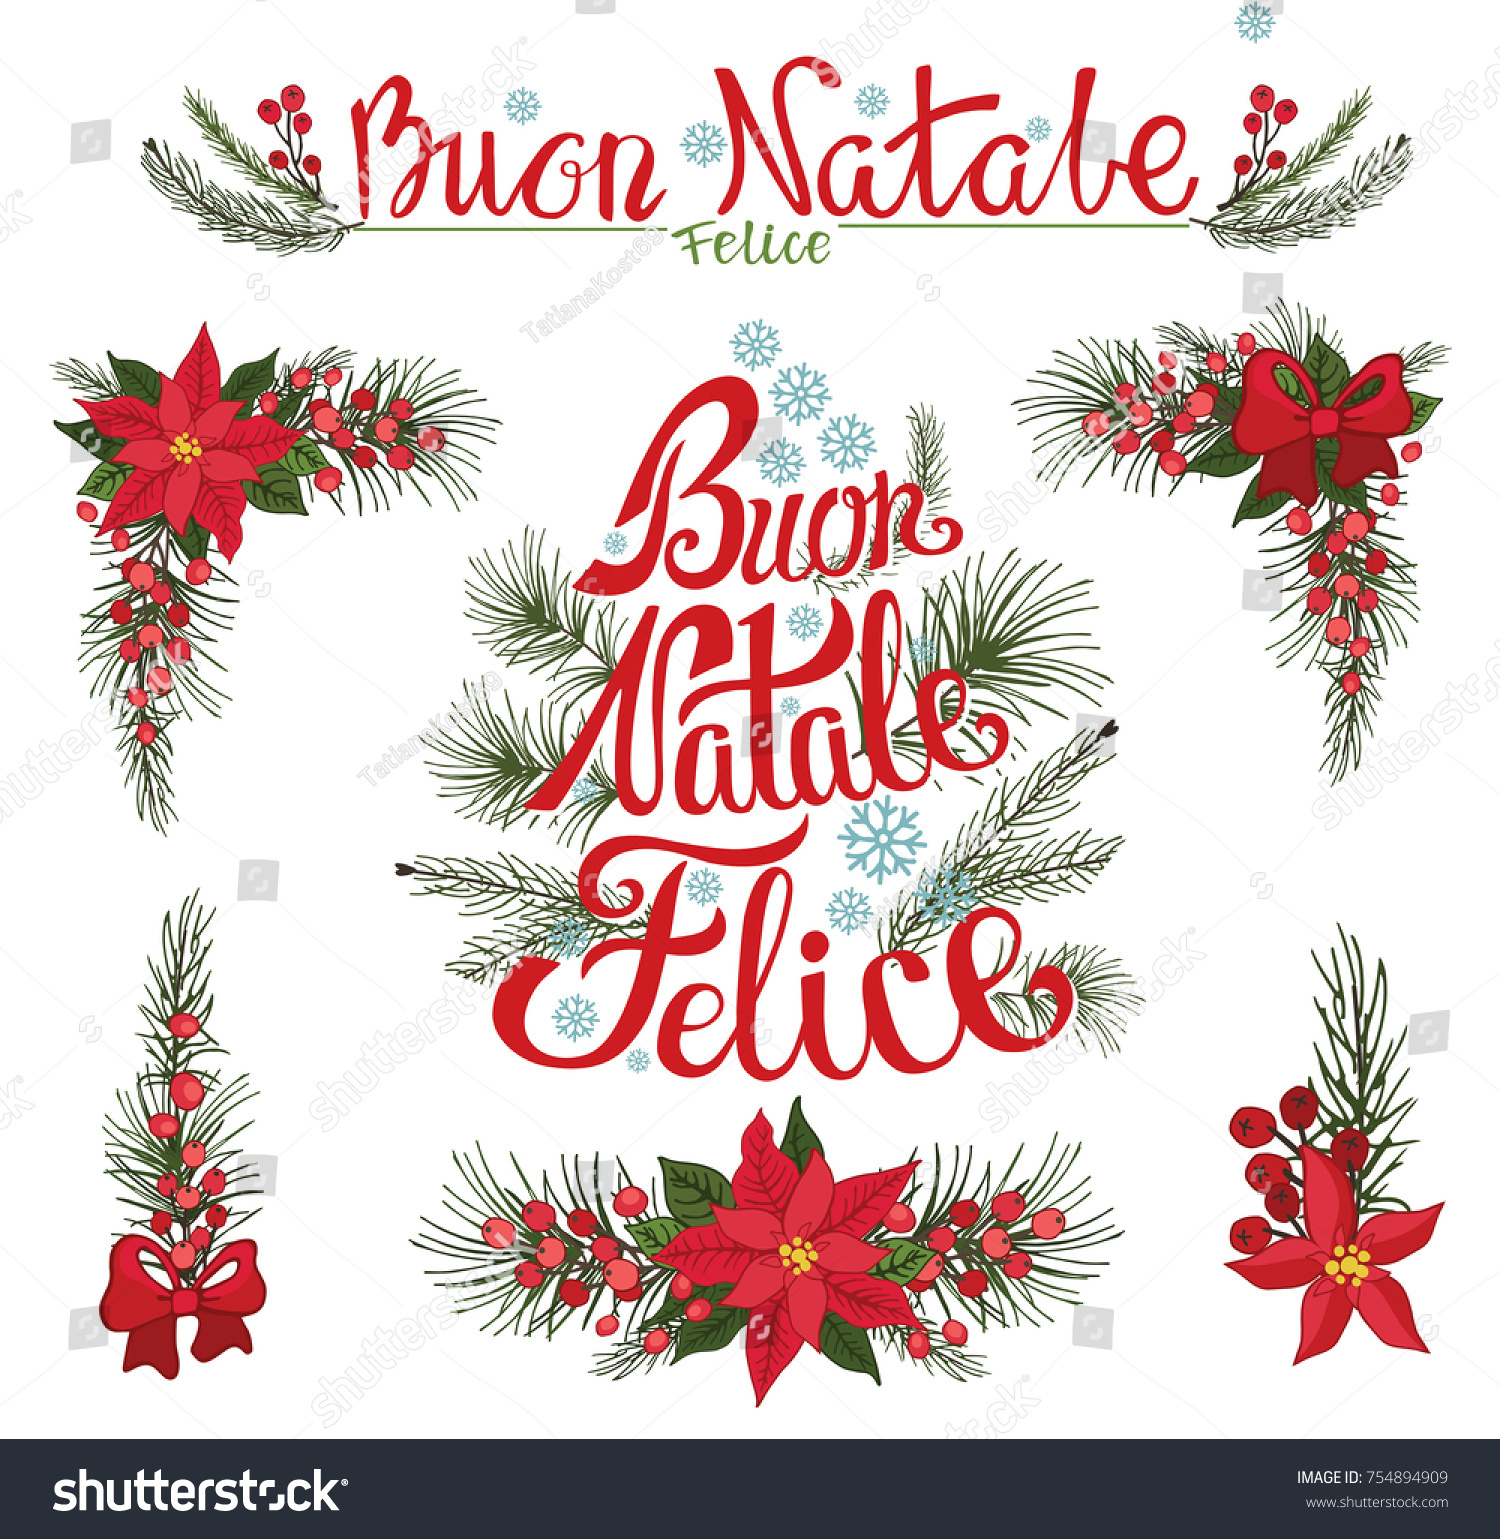 Buon Natale Outdoor Decorations.Christmas Buon Natale Italian Lettering New Stock Vector Royalty Free 754894909